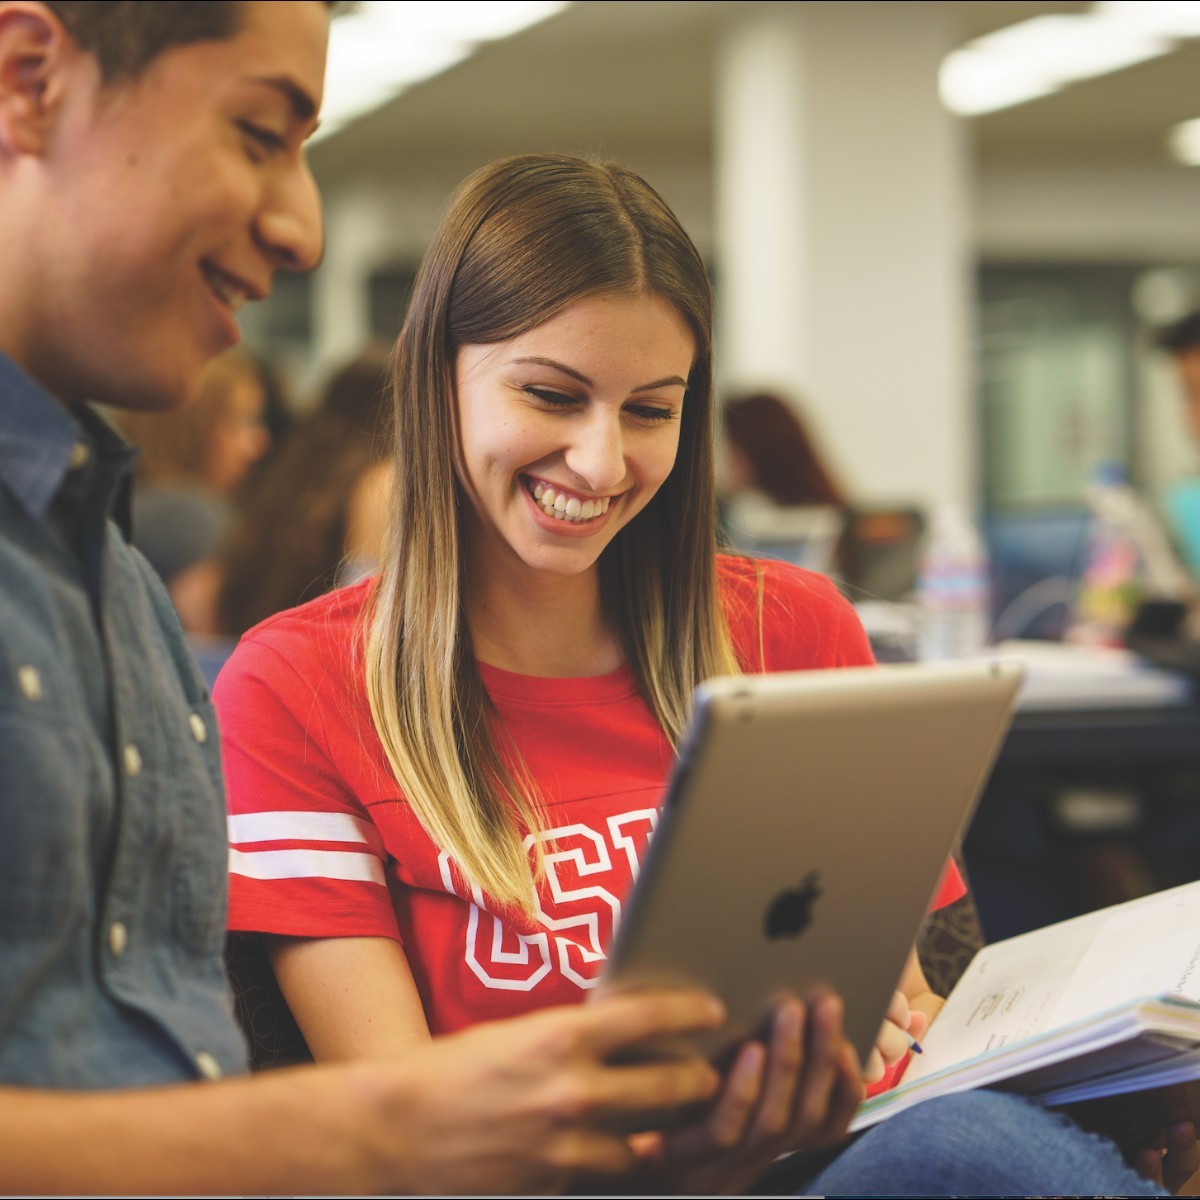 Good news! The FAFSA/CADAA priority deadline in California has been extended to May 2. Get your application in to maximize your opportunity to receive financial aid. #CSUN